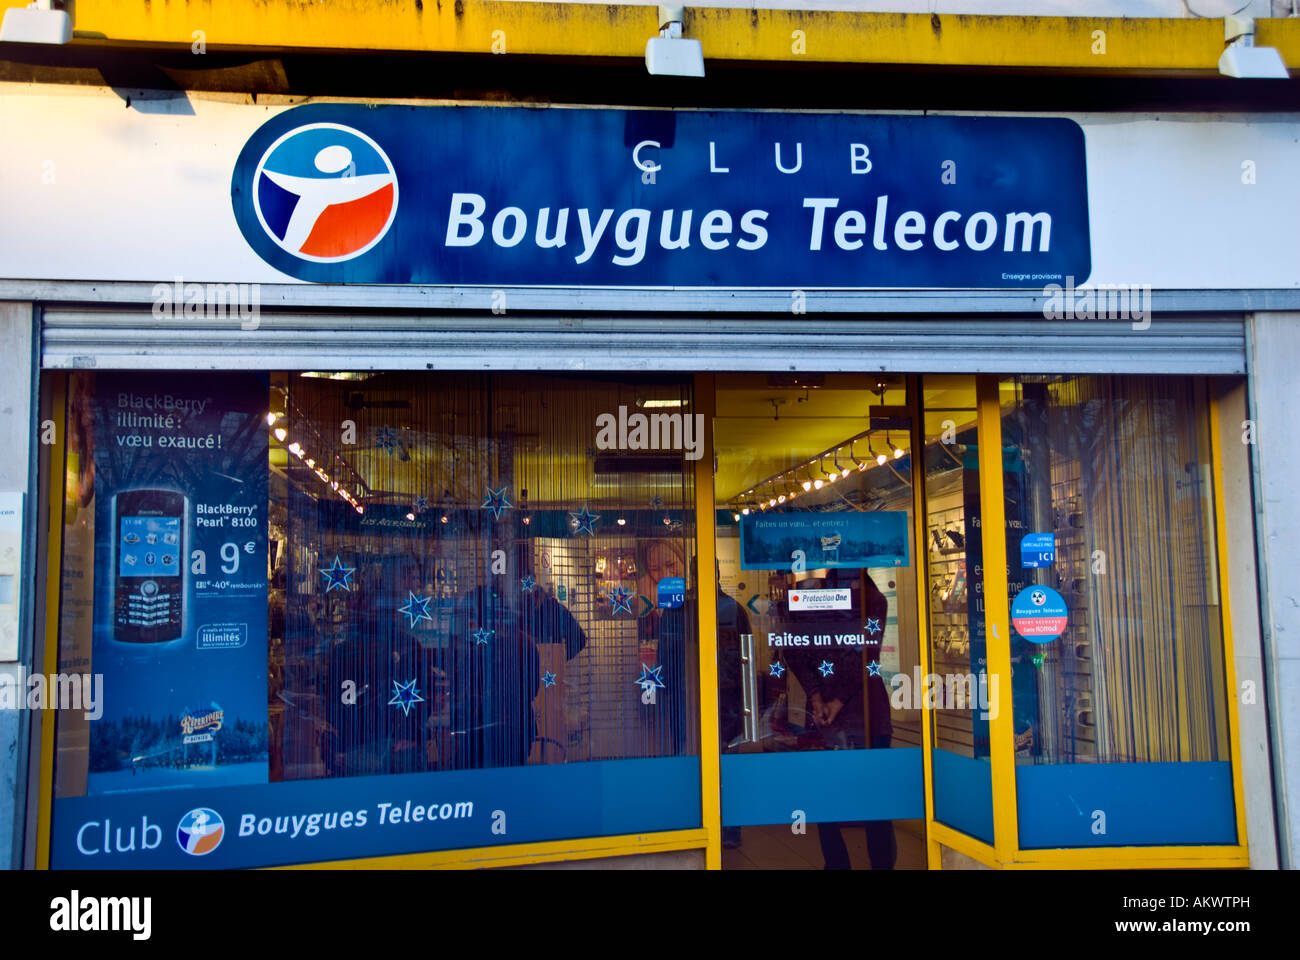 Paris Fra-nce, Shopping Cellphone Stores 'Bouygues Telecom' Storefront Sign Window Front Stock Photo